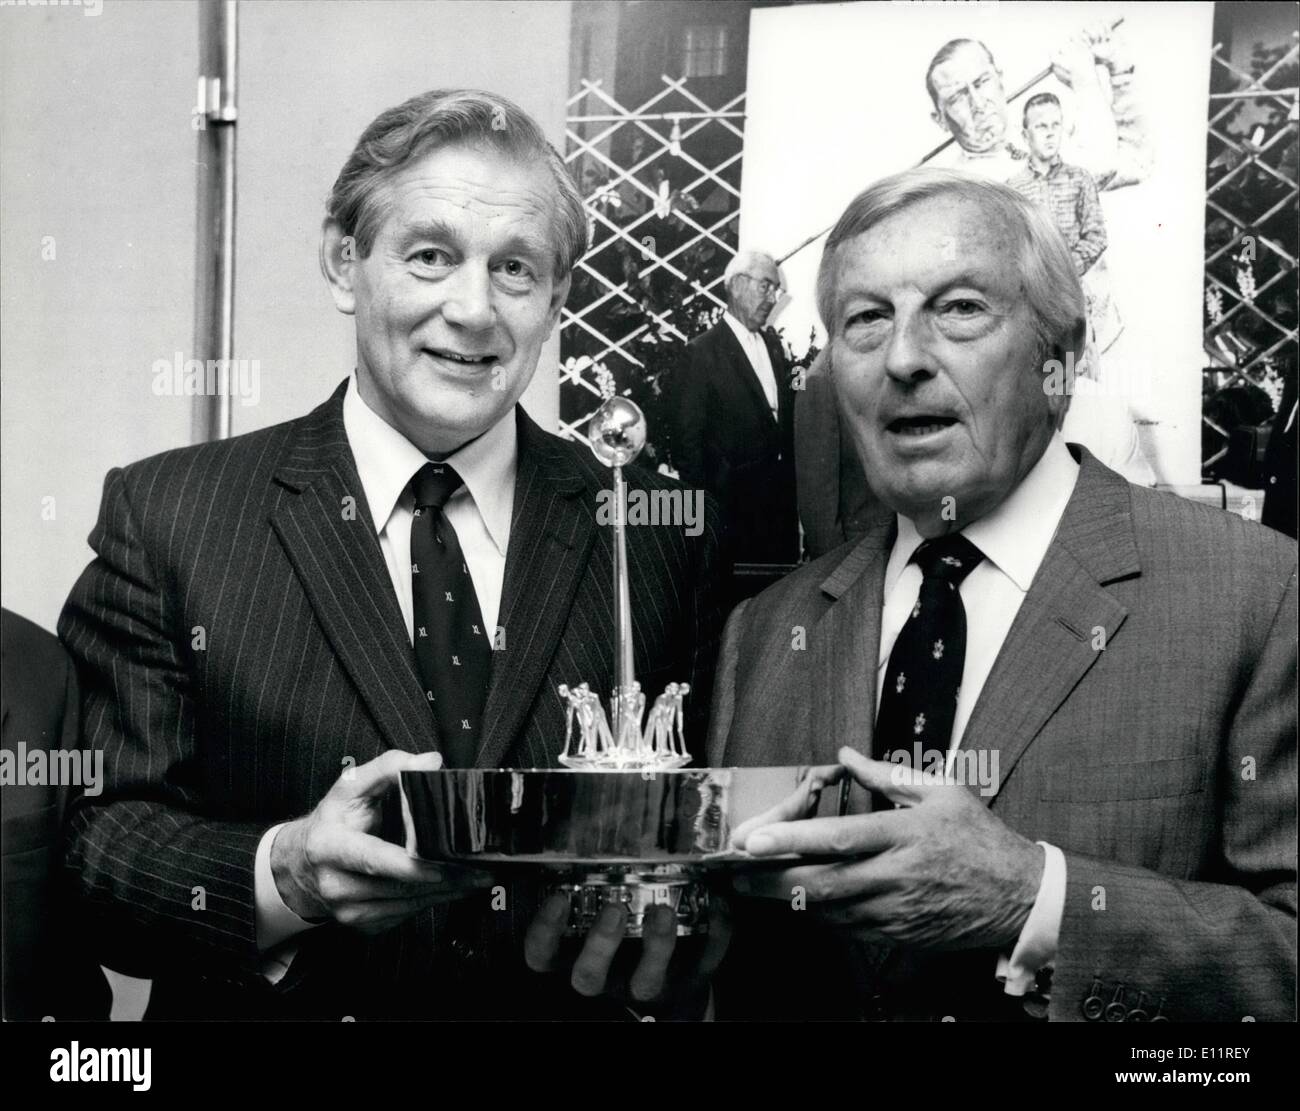 Oct. 10, 1979 - Henry Cotton Receives The 1979 Walter Hagen Award: At Simpson, Piccadilly today the world famous Golfer, Henry Cotton was presented with the 1979 Walter Hagen Award, by the Minister for Sport, Hector Monro. Henry Cotton has long been recognized as one of the game's most knowledgeable teachers and players. A three time winner of the British Open-in 1934, 1937 and 1948-The trophy is presented annually to an individual who has contributed to better golfing ties and friendship between Britain and America. This year Henry is co-winner with Roberto de Vicenao Stock Photo